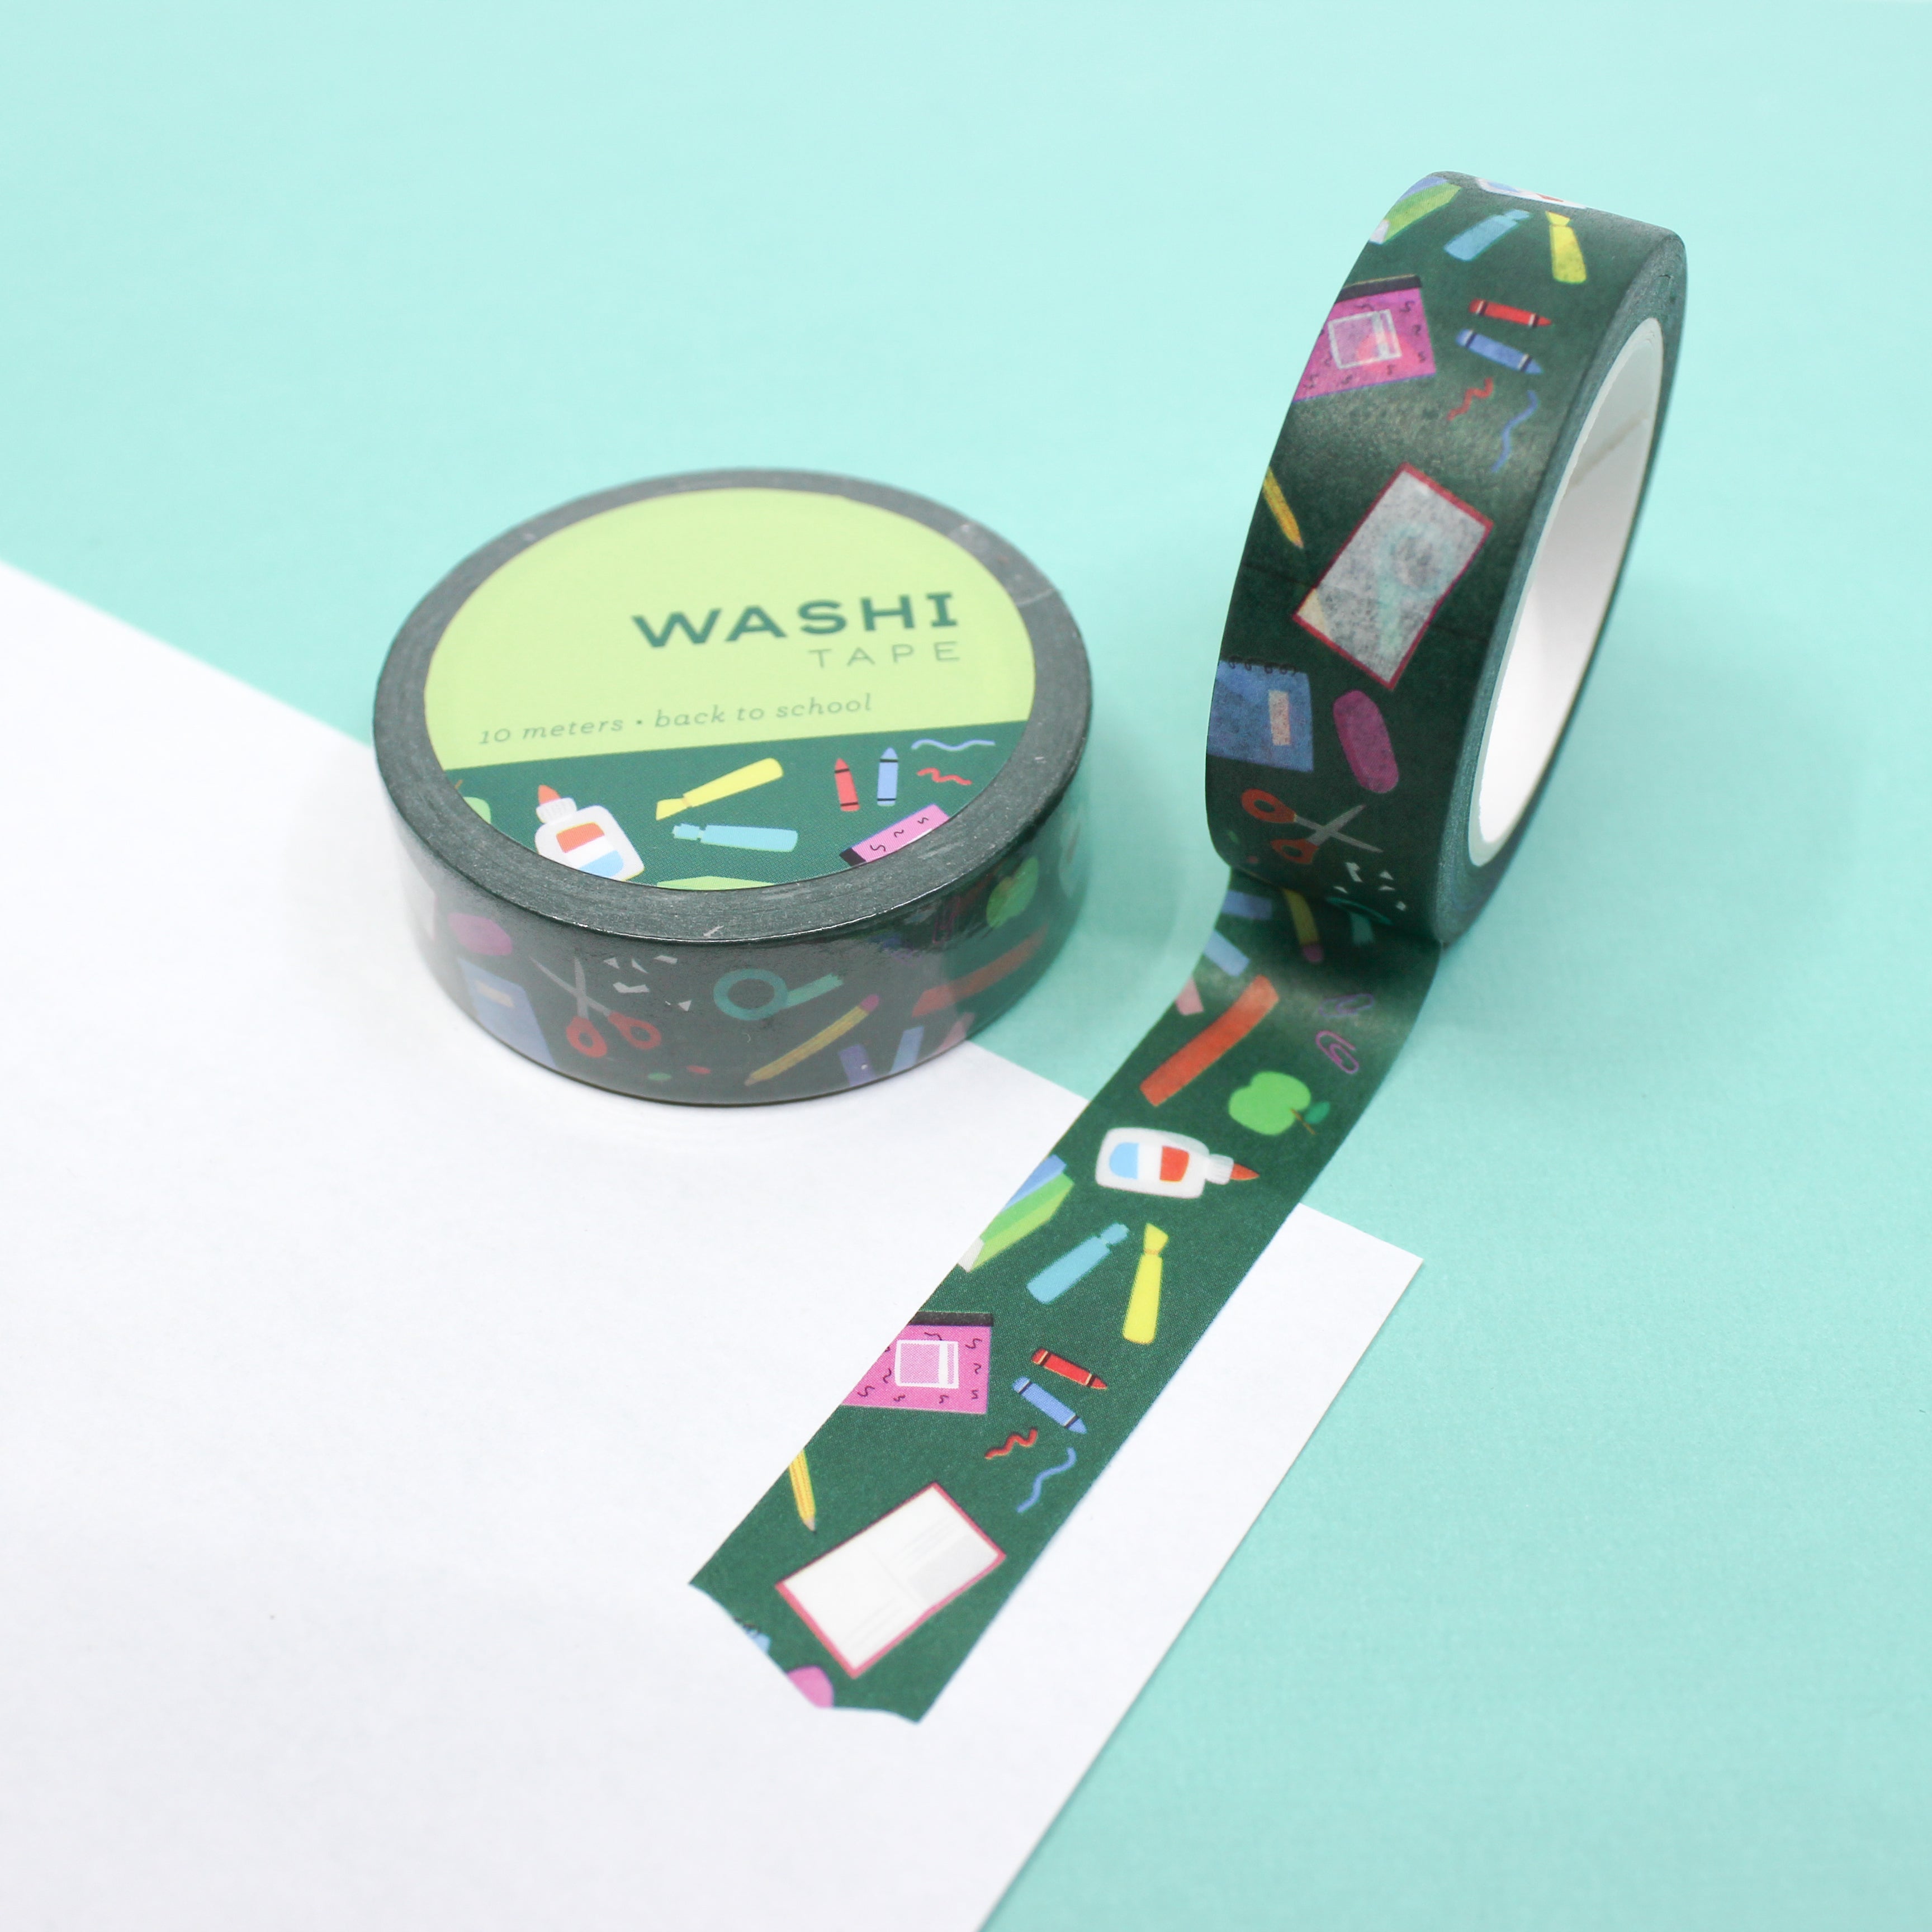 This is a school supplies themed washi tape from BBB Supplies Craft Shop